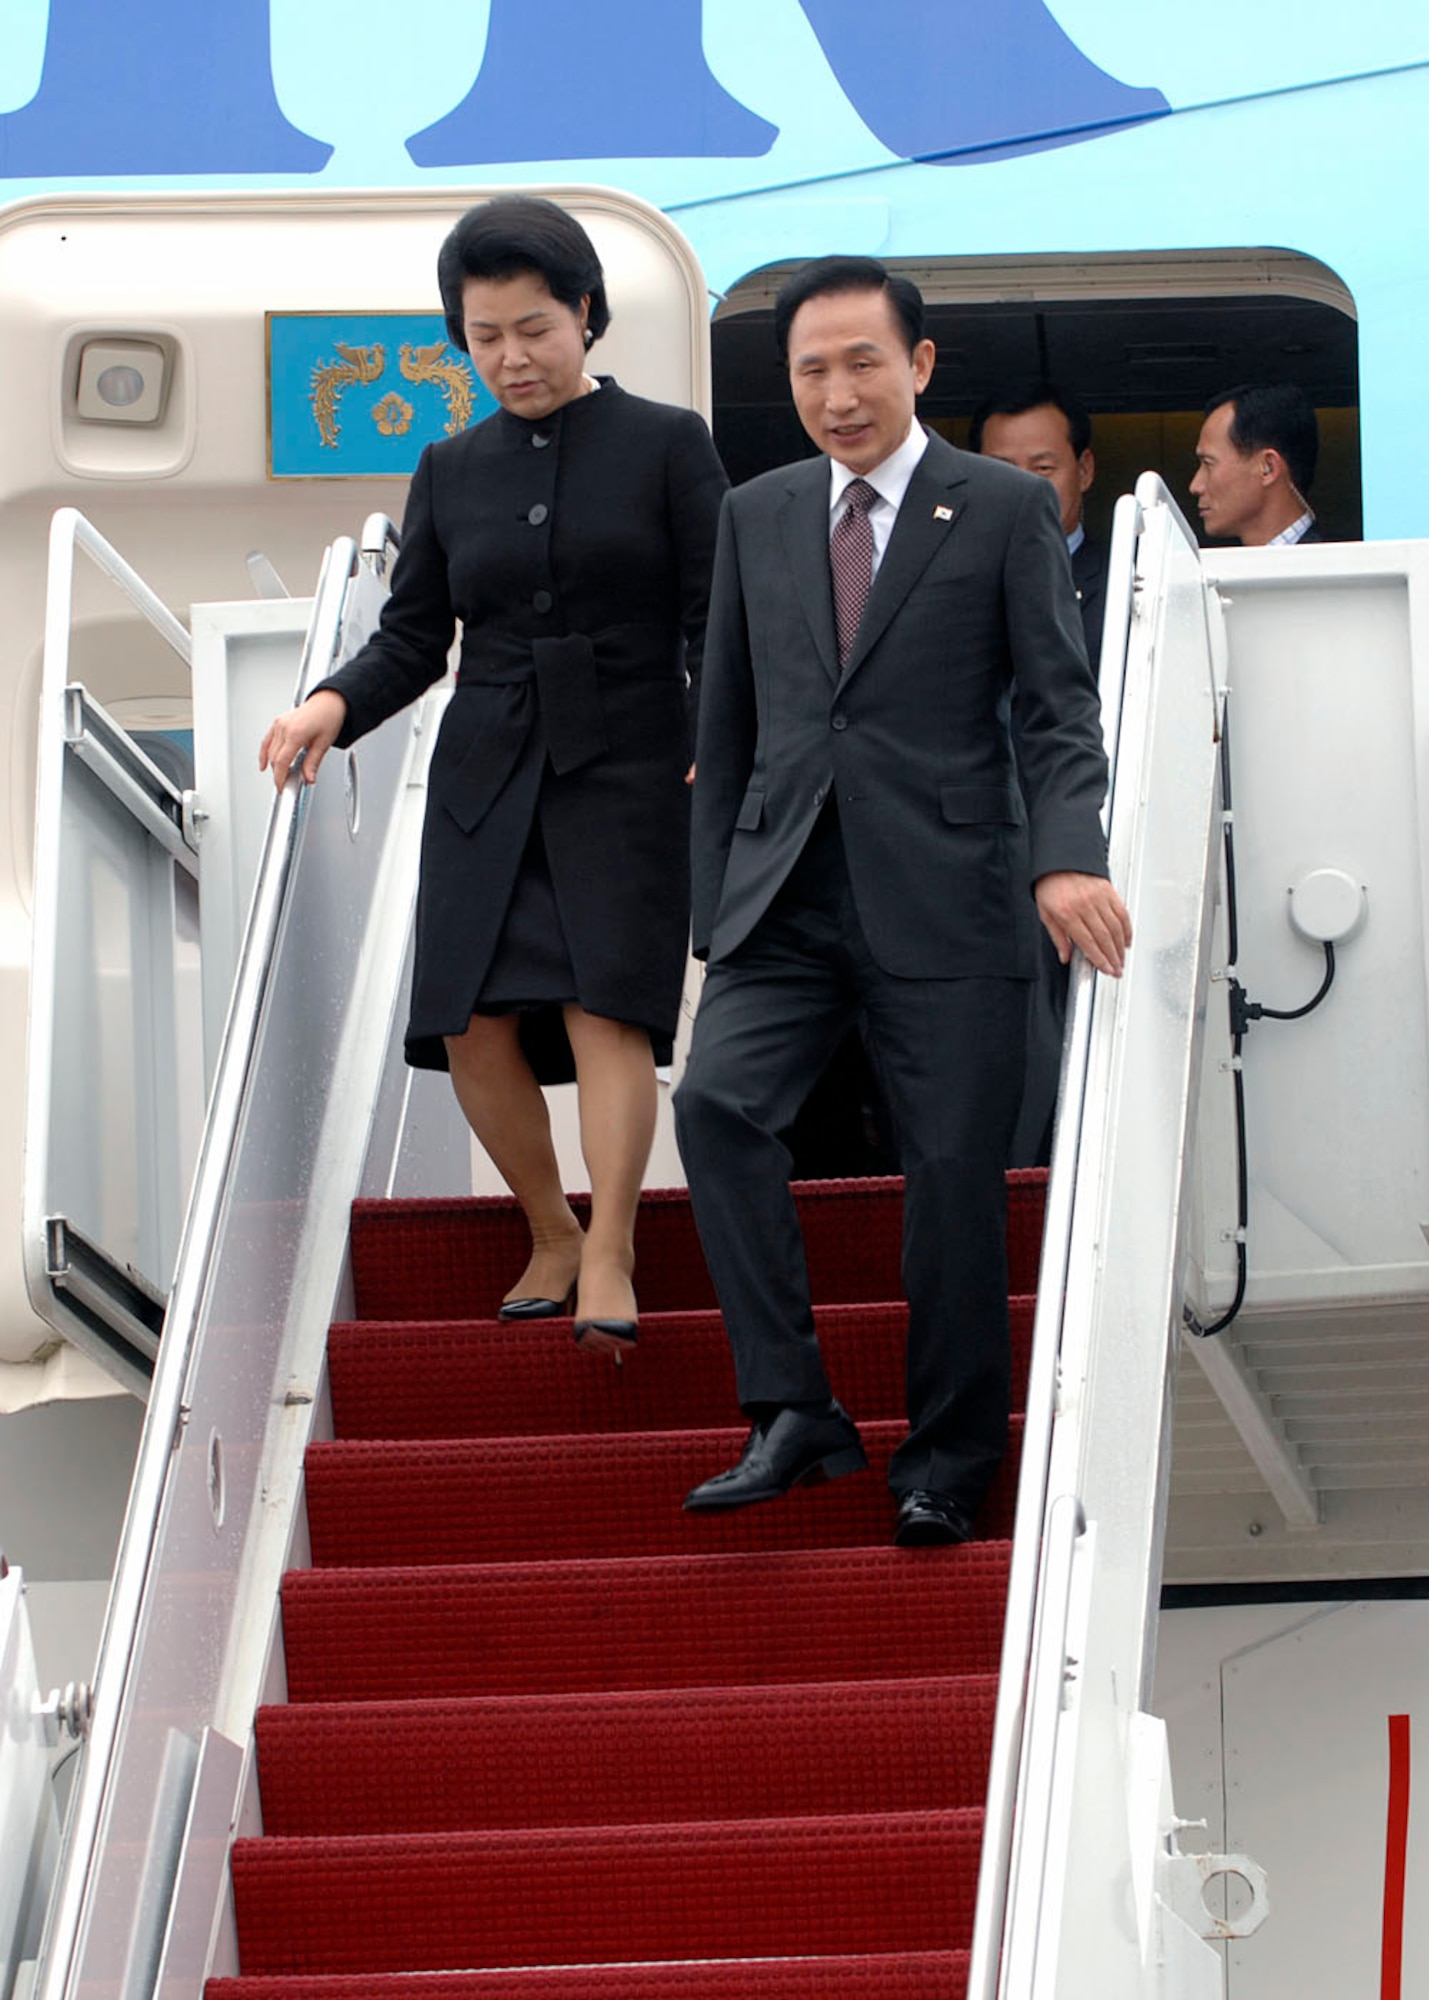 South Korean President Lee Myung-bak  and First Lady Kim Yun-ok land at Andrews Air Force Base Md., Nov.14, 2008, for the two-day G20 Summit at the White House in Washington. The summit, hosted by U.S. President George W. Bush, will bring together world leaders to discuss the increasing global financial crisis, its causes and efforts to resolve it. (U.S. Air Force photo by Tech. Sgt. Craig Clapper)